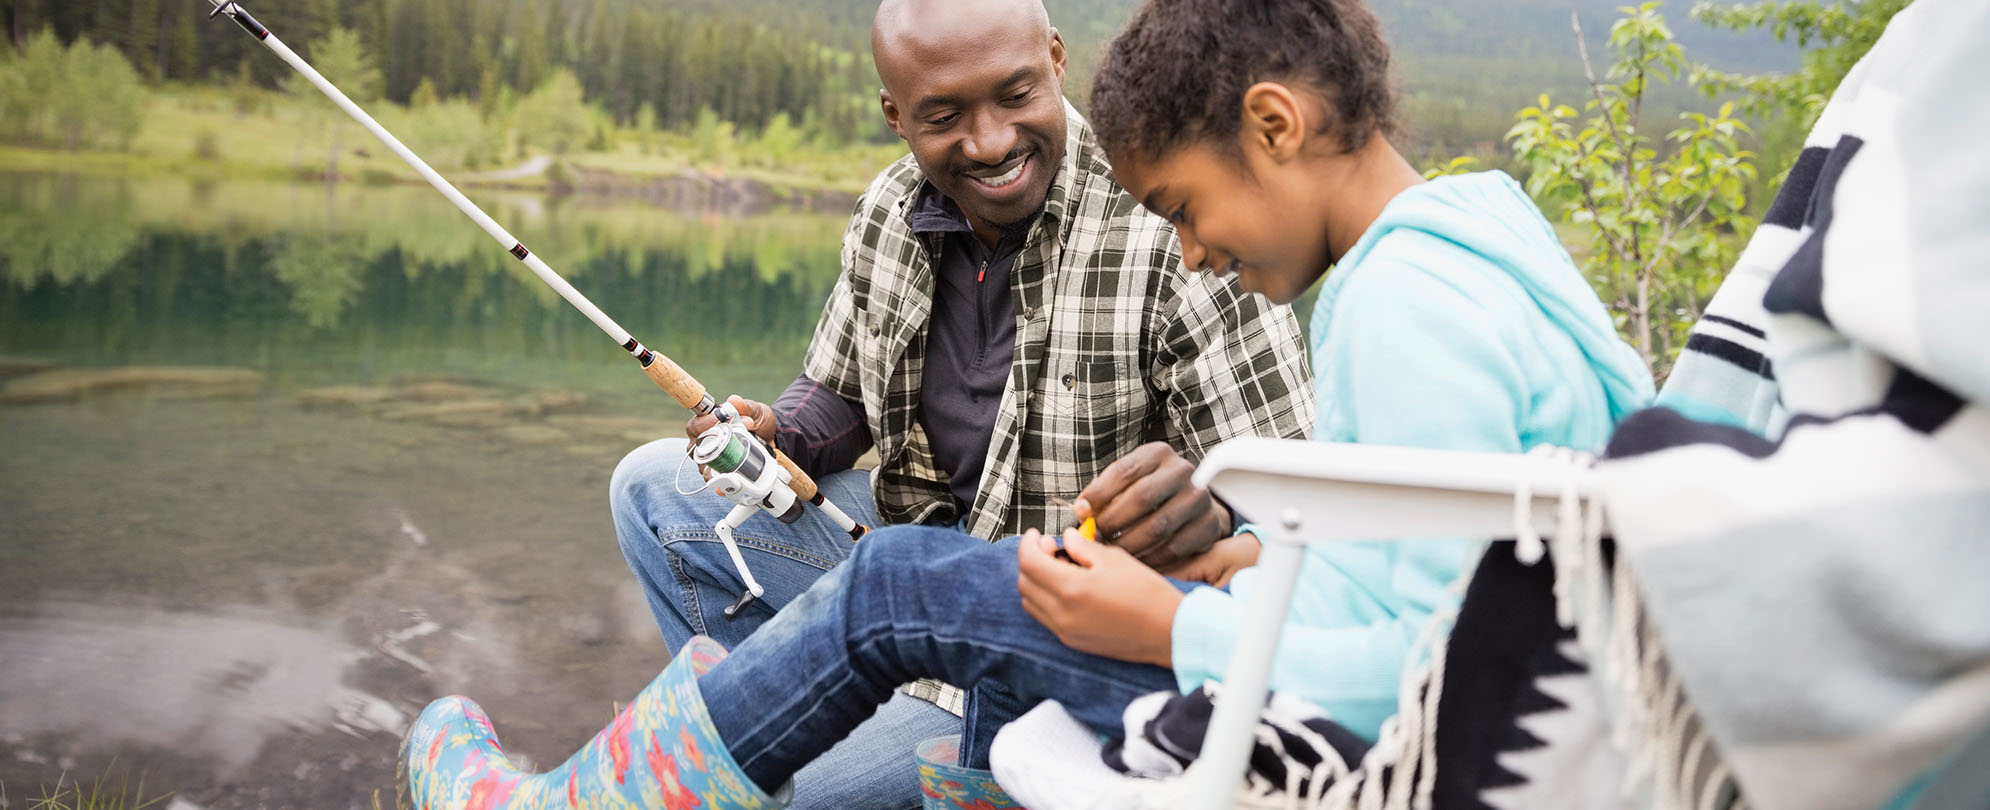 A dad and daughter fishing by the water, the smiling dad helping the daughter with a fishing hook.